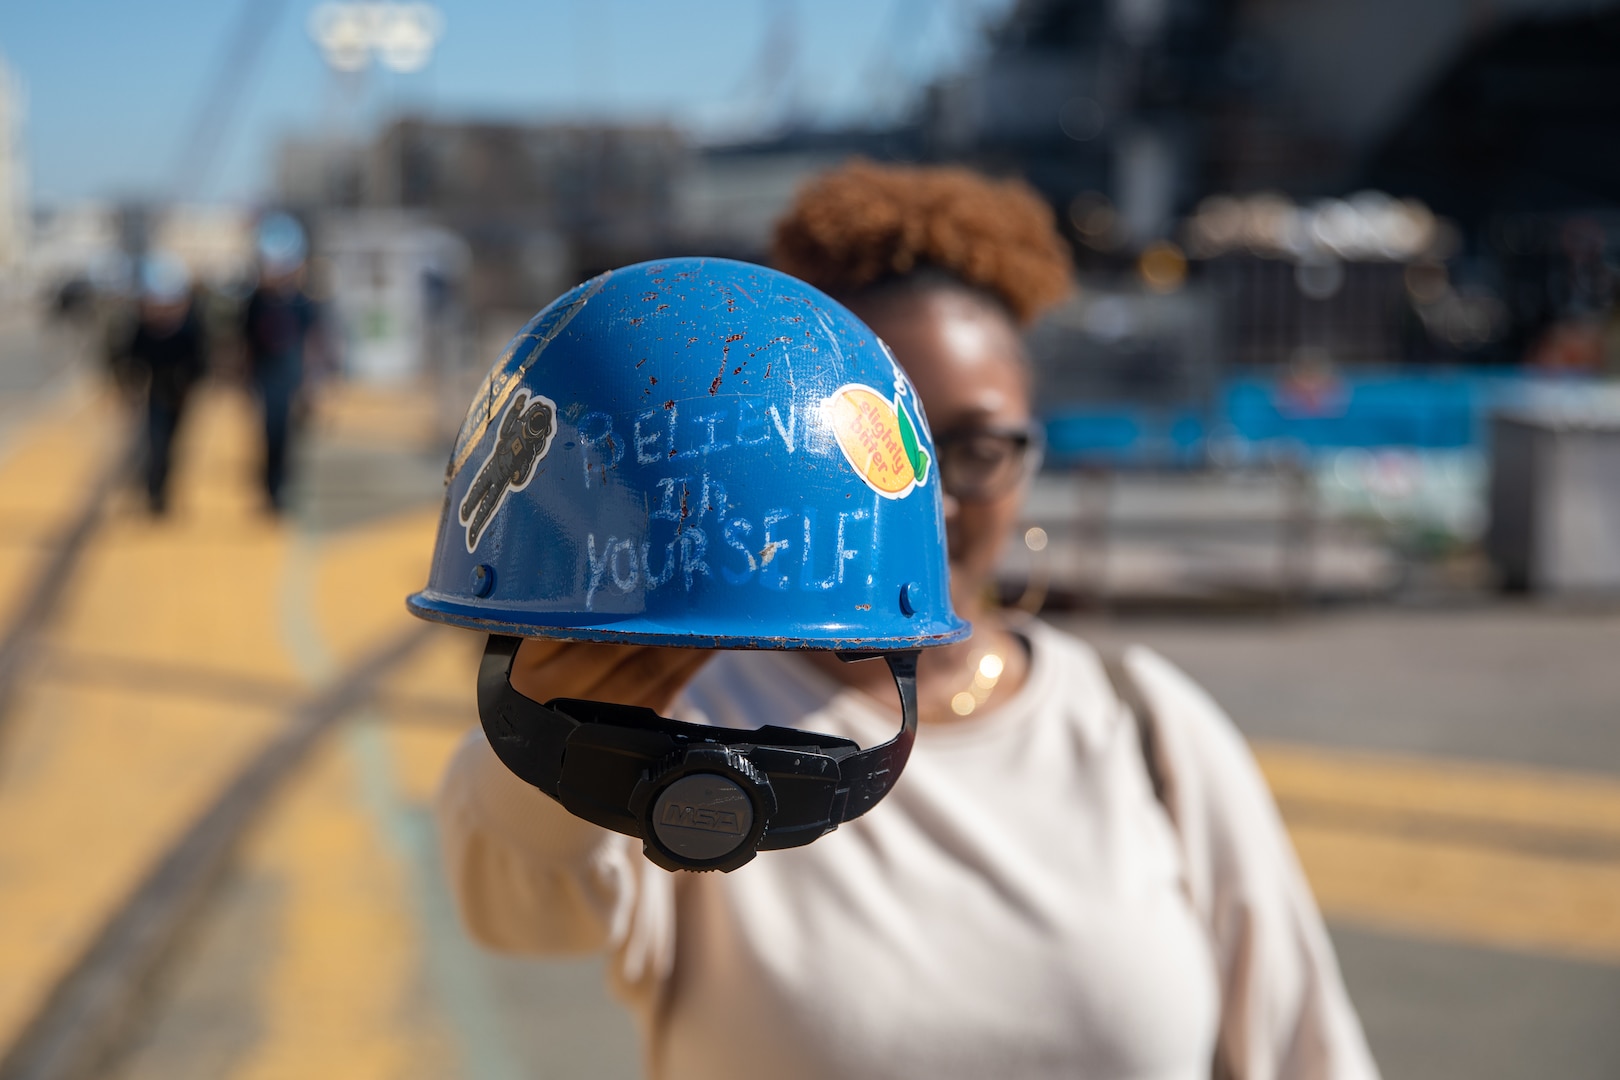 “Believe in yourself.” These are words Insulator Jacqueline Winborne lives by, the phrase etched in her hard hat to echo her beliefs. A recent graduate of the Norfolk Naval Shipyard (NNSY) Apprenticeship Program, she takes on each day staying true to her ideals. Through her service and dedication to the shipyard’s mission and to her team, Winborne was recently nominated for the Virginia Department of Labor (DOL) and Industry’s Division of Registered Apprenticeship Outstanding Apprentice of the Year for 2021 – becoming the third individual from the Insulator Shop (Shop 57) to win the title across the last three years.